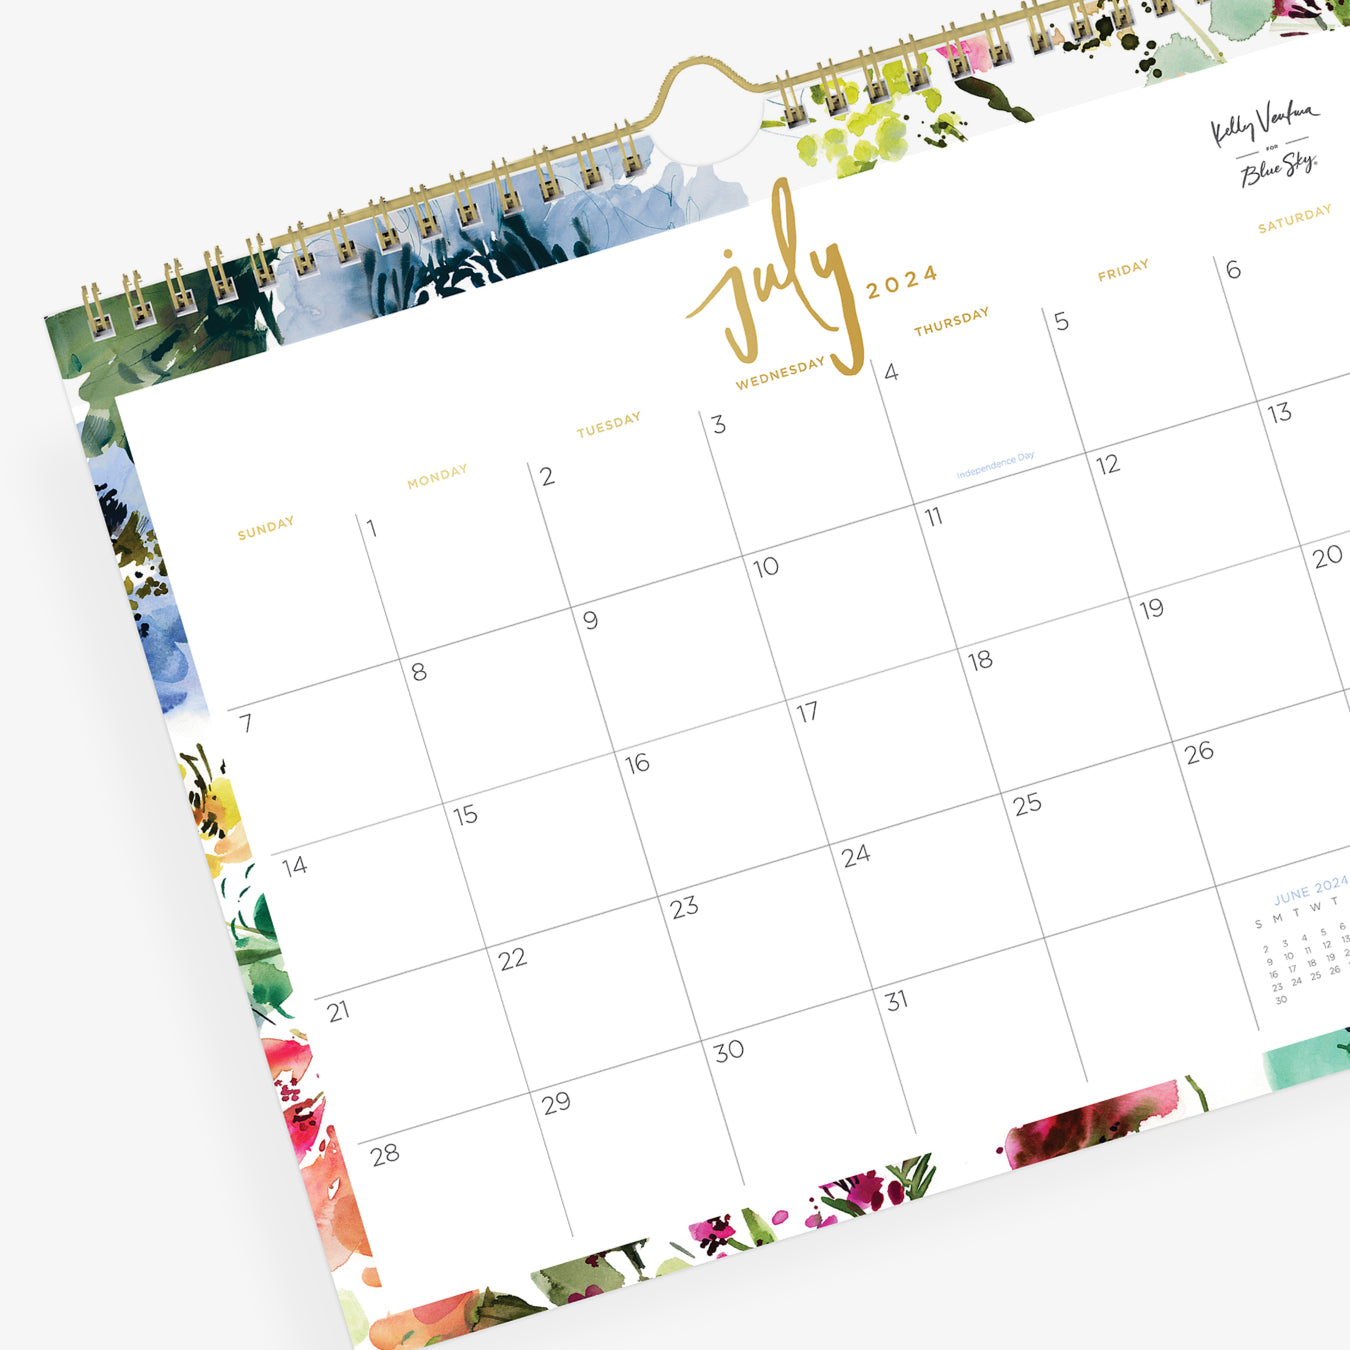 kelly ventura exclusive 11x8.75 wall calendar for june and july academic year featuring floral pattern and boxed dates for July 2024- June 2025